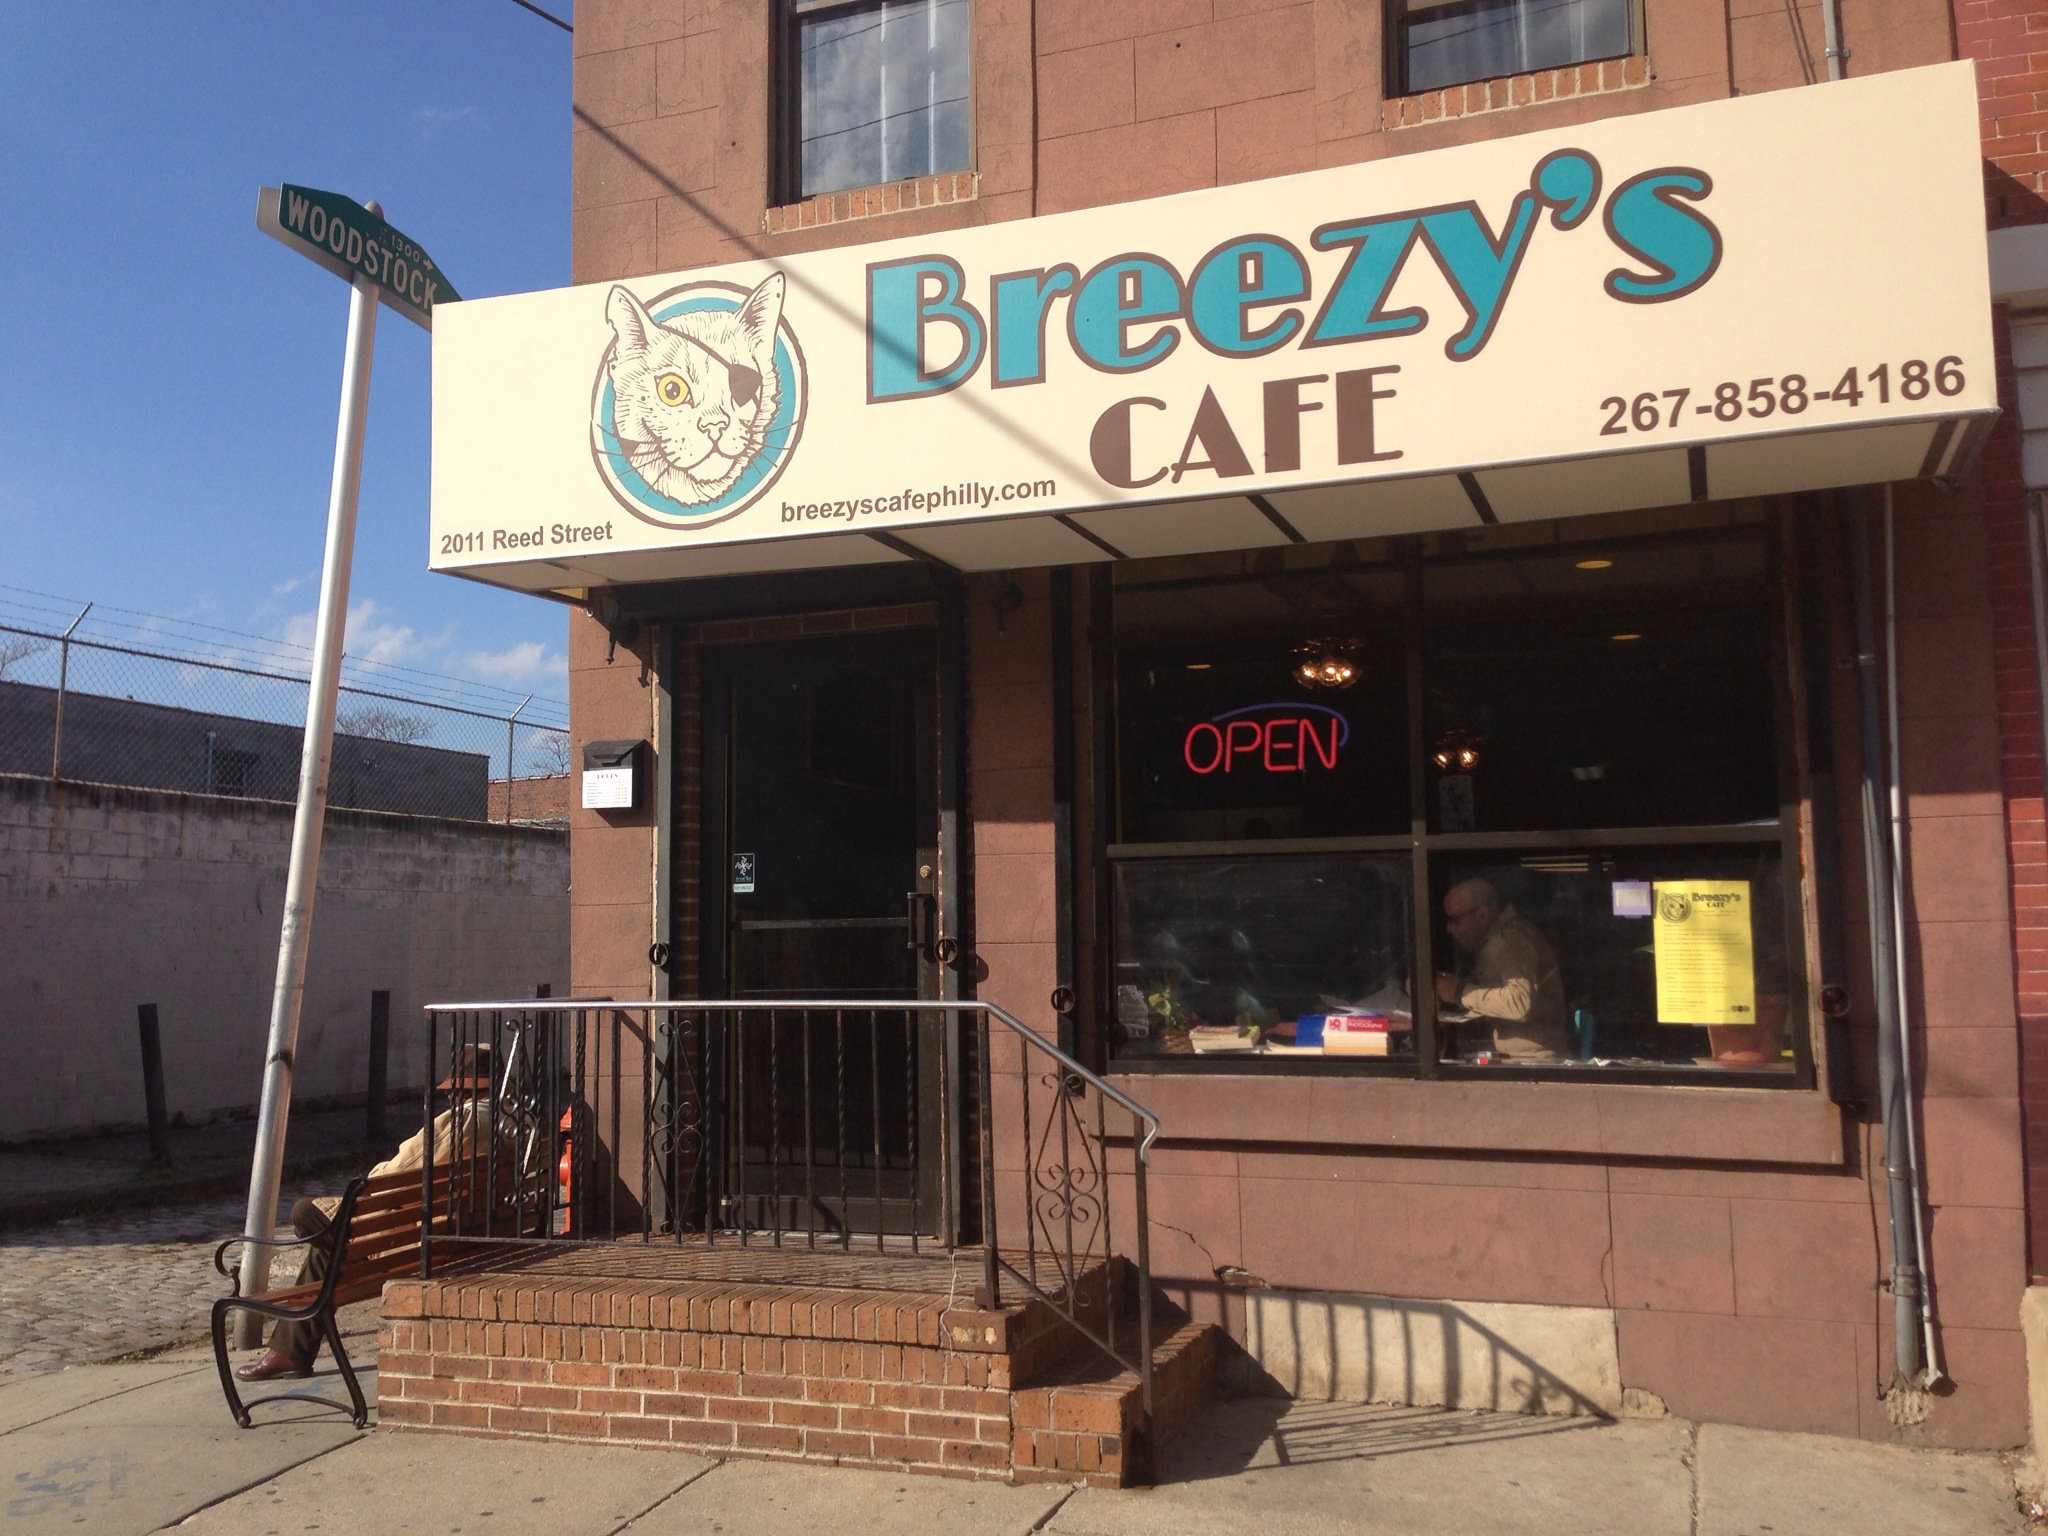 Breezy’s Cafe: Pirate Cats & Great Food FTW